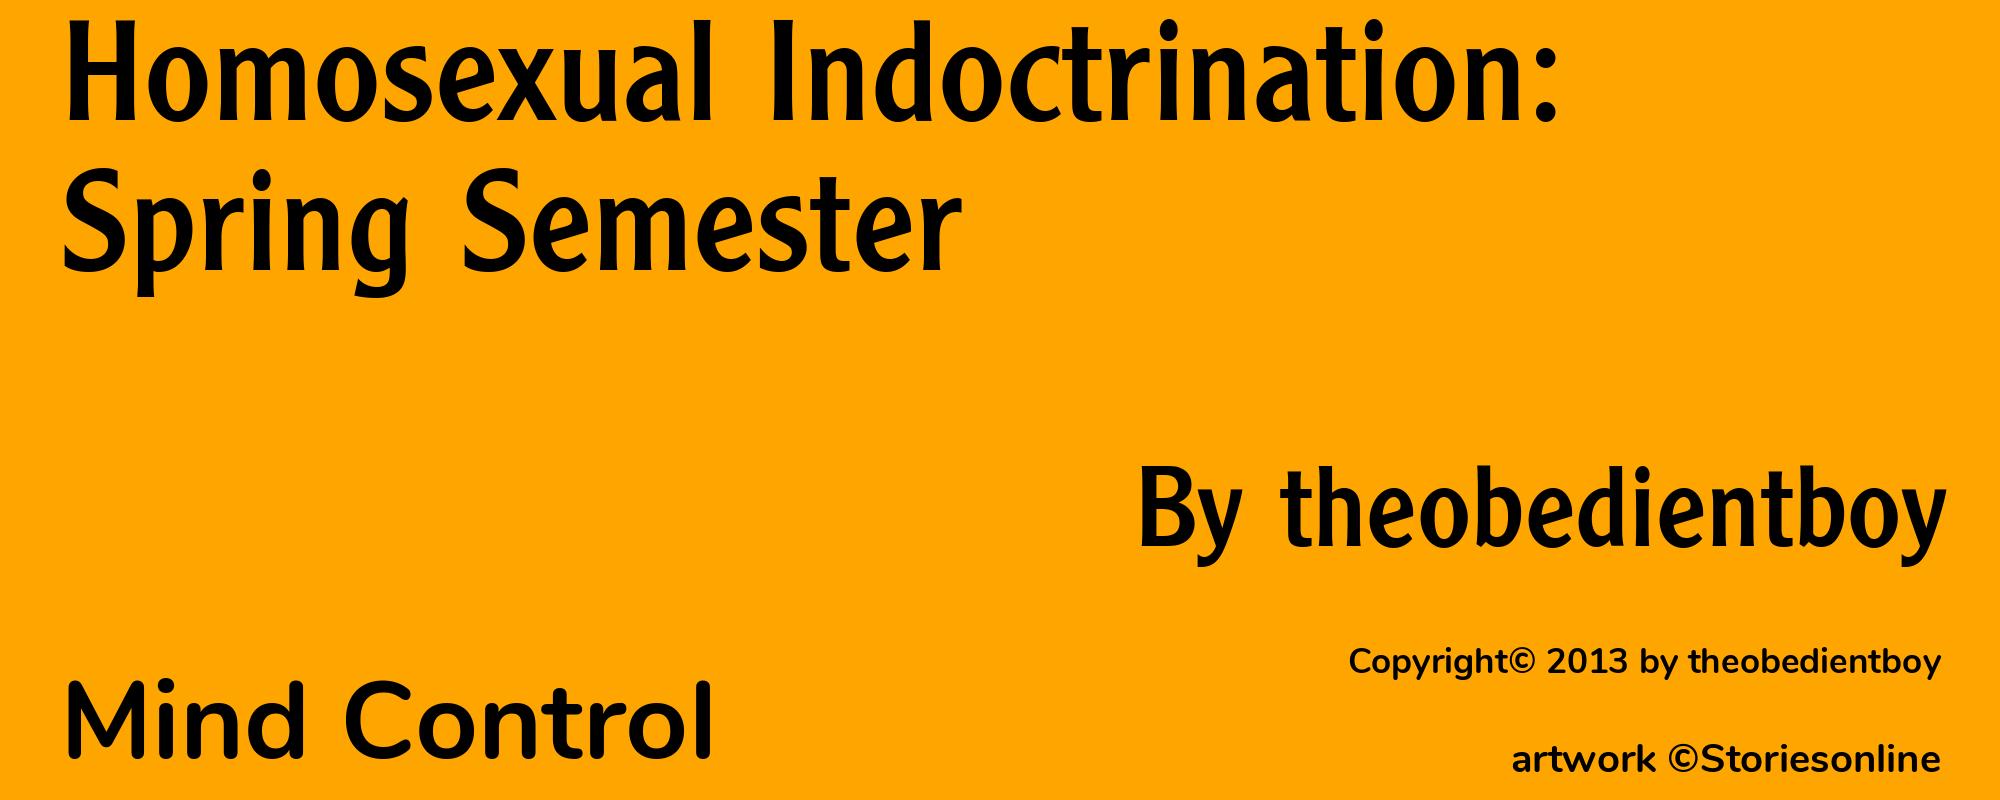 Homosexual Indoctrination: Spring Semester - Cover